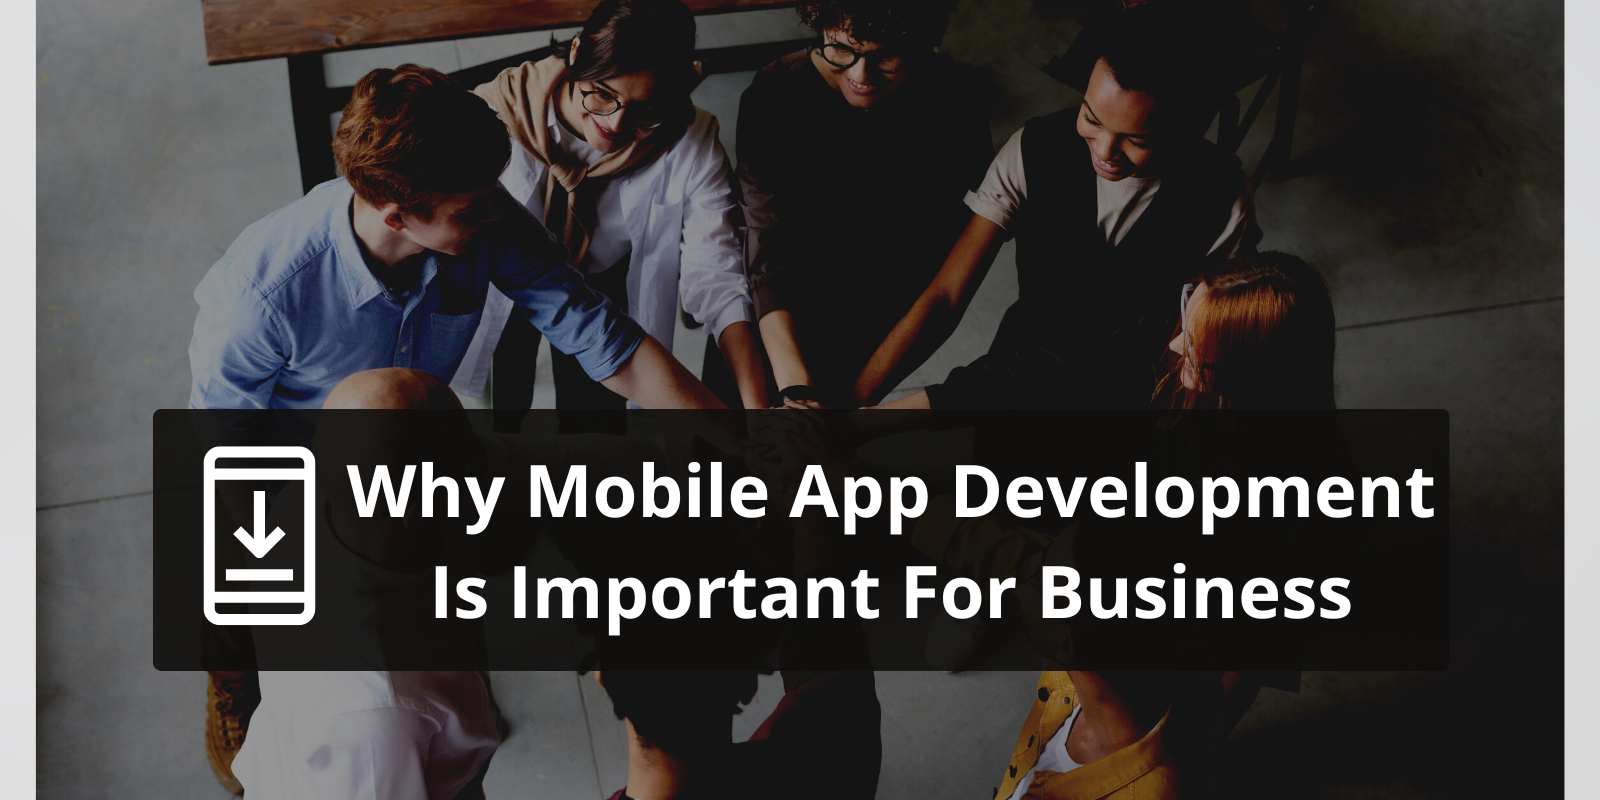 public/uploads/2022/11/Why-Mobile-App-Development-Is-Important-For-Business.png